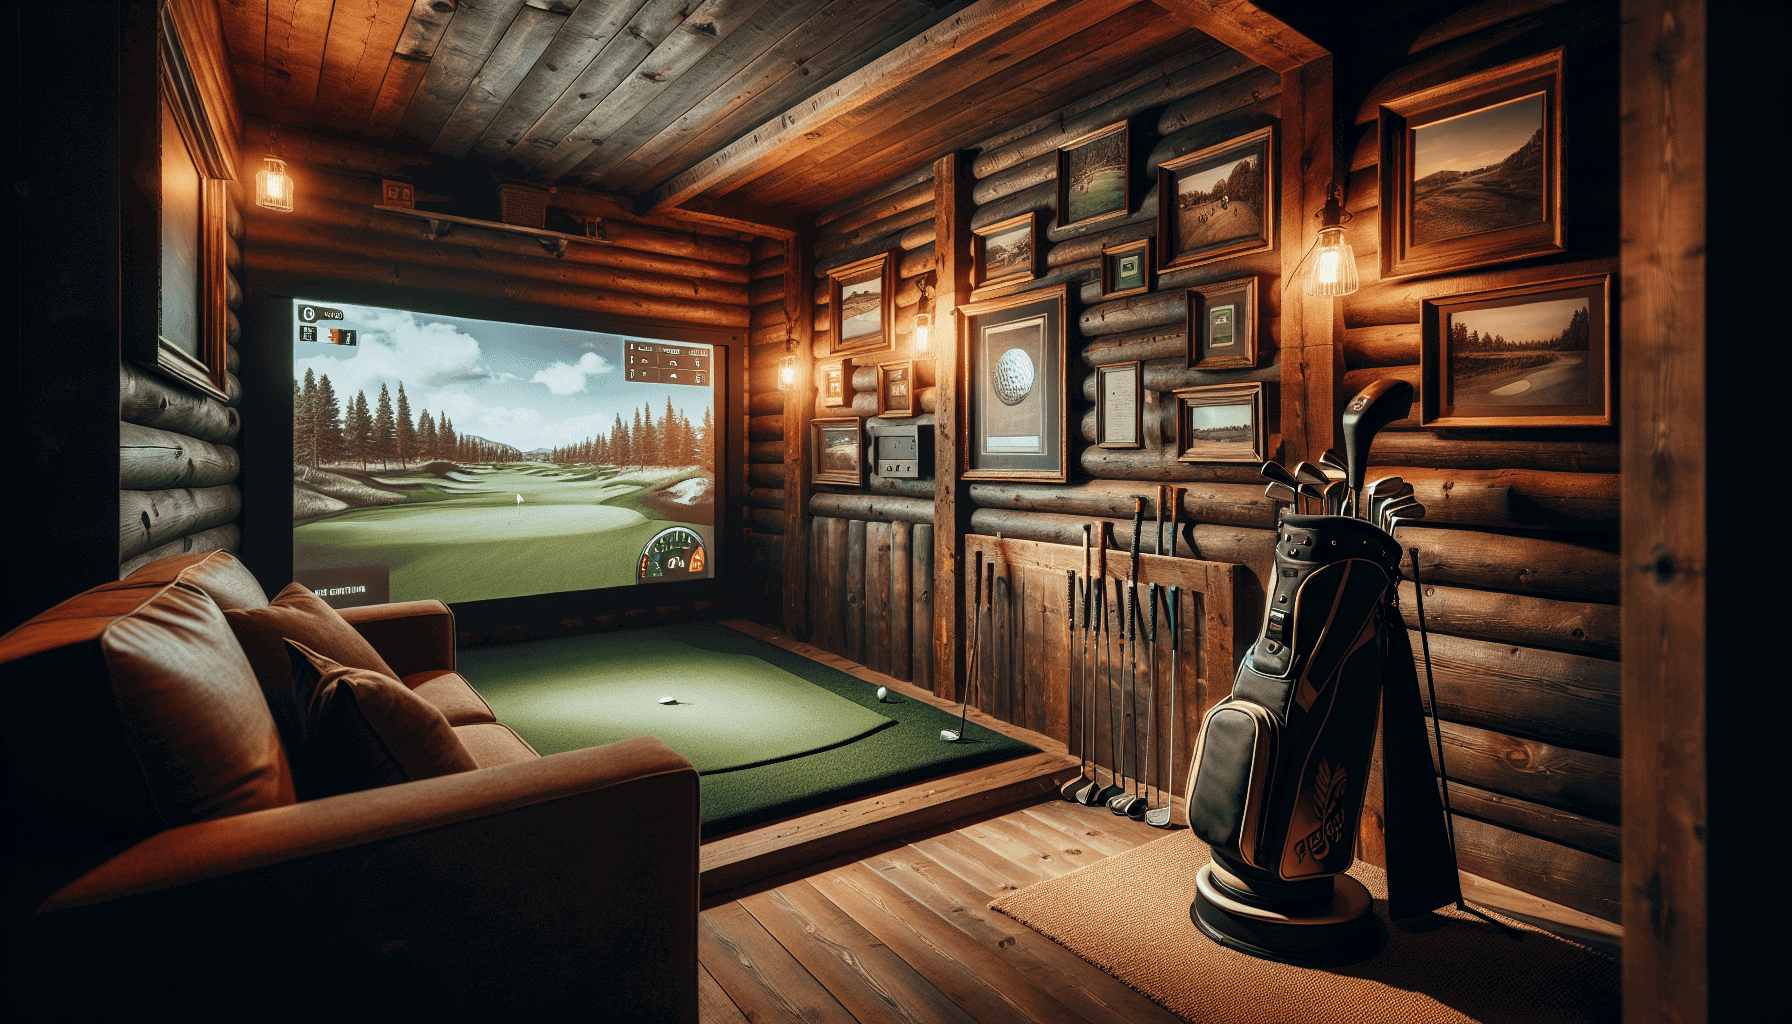 Cozy ambiance in golf simulator man cave